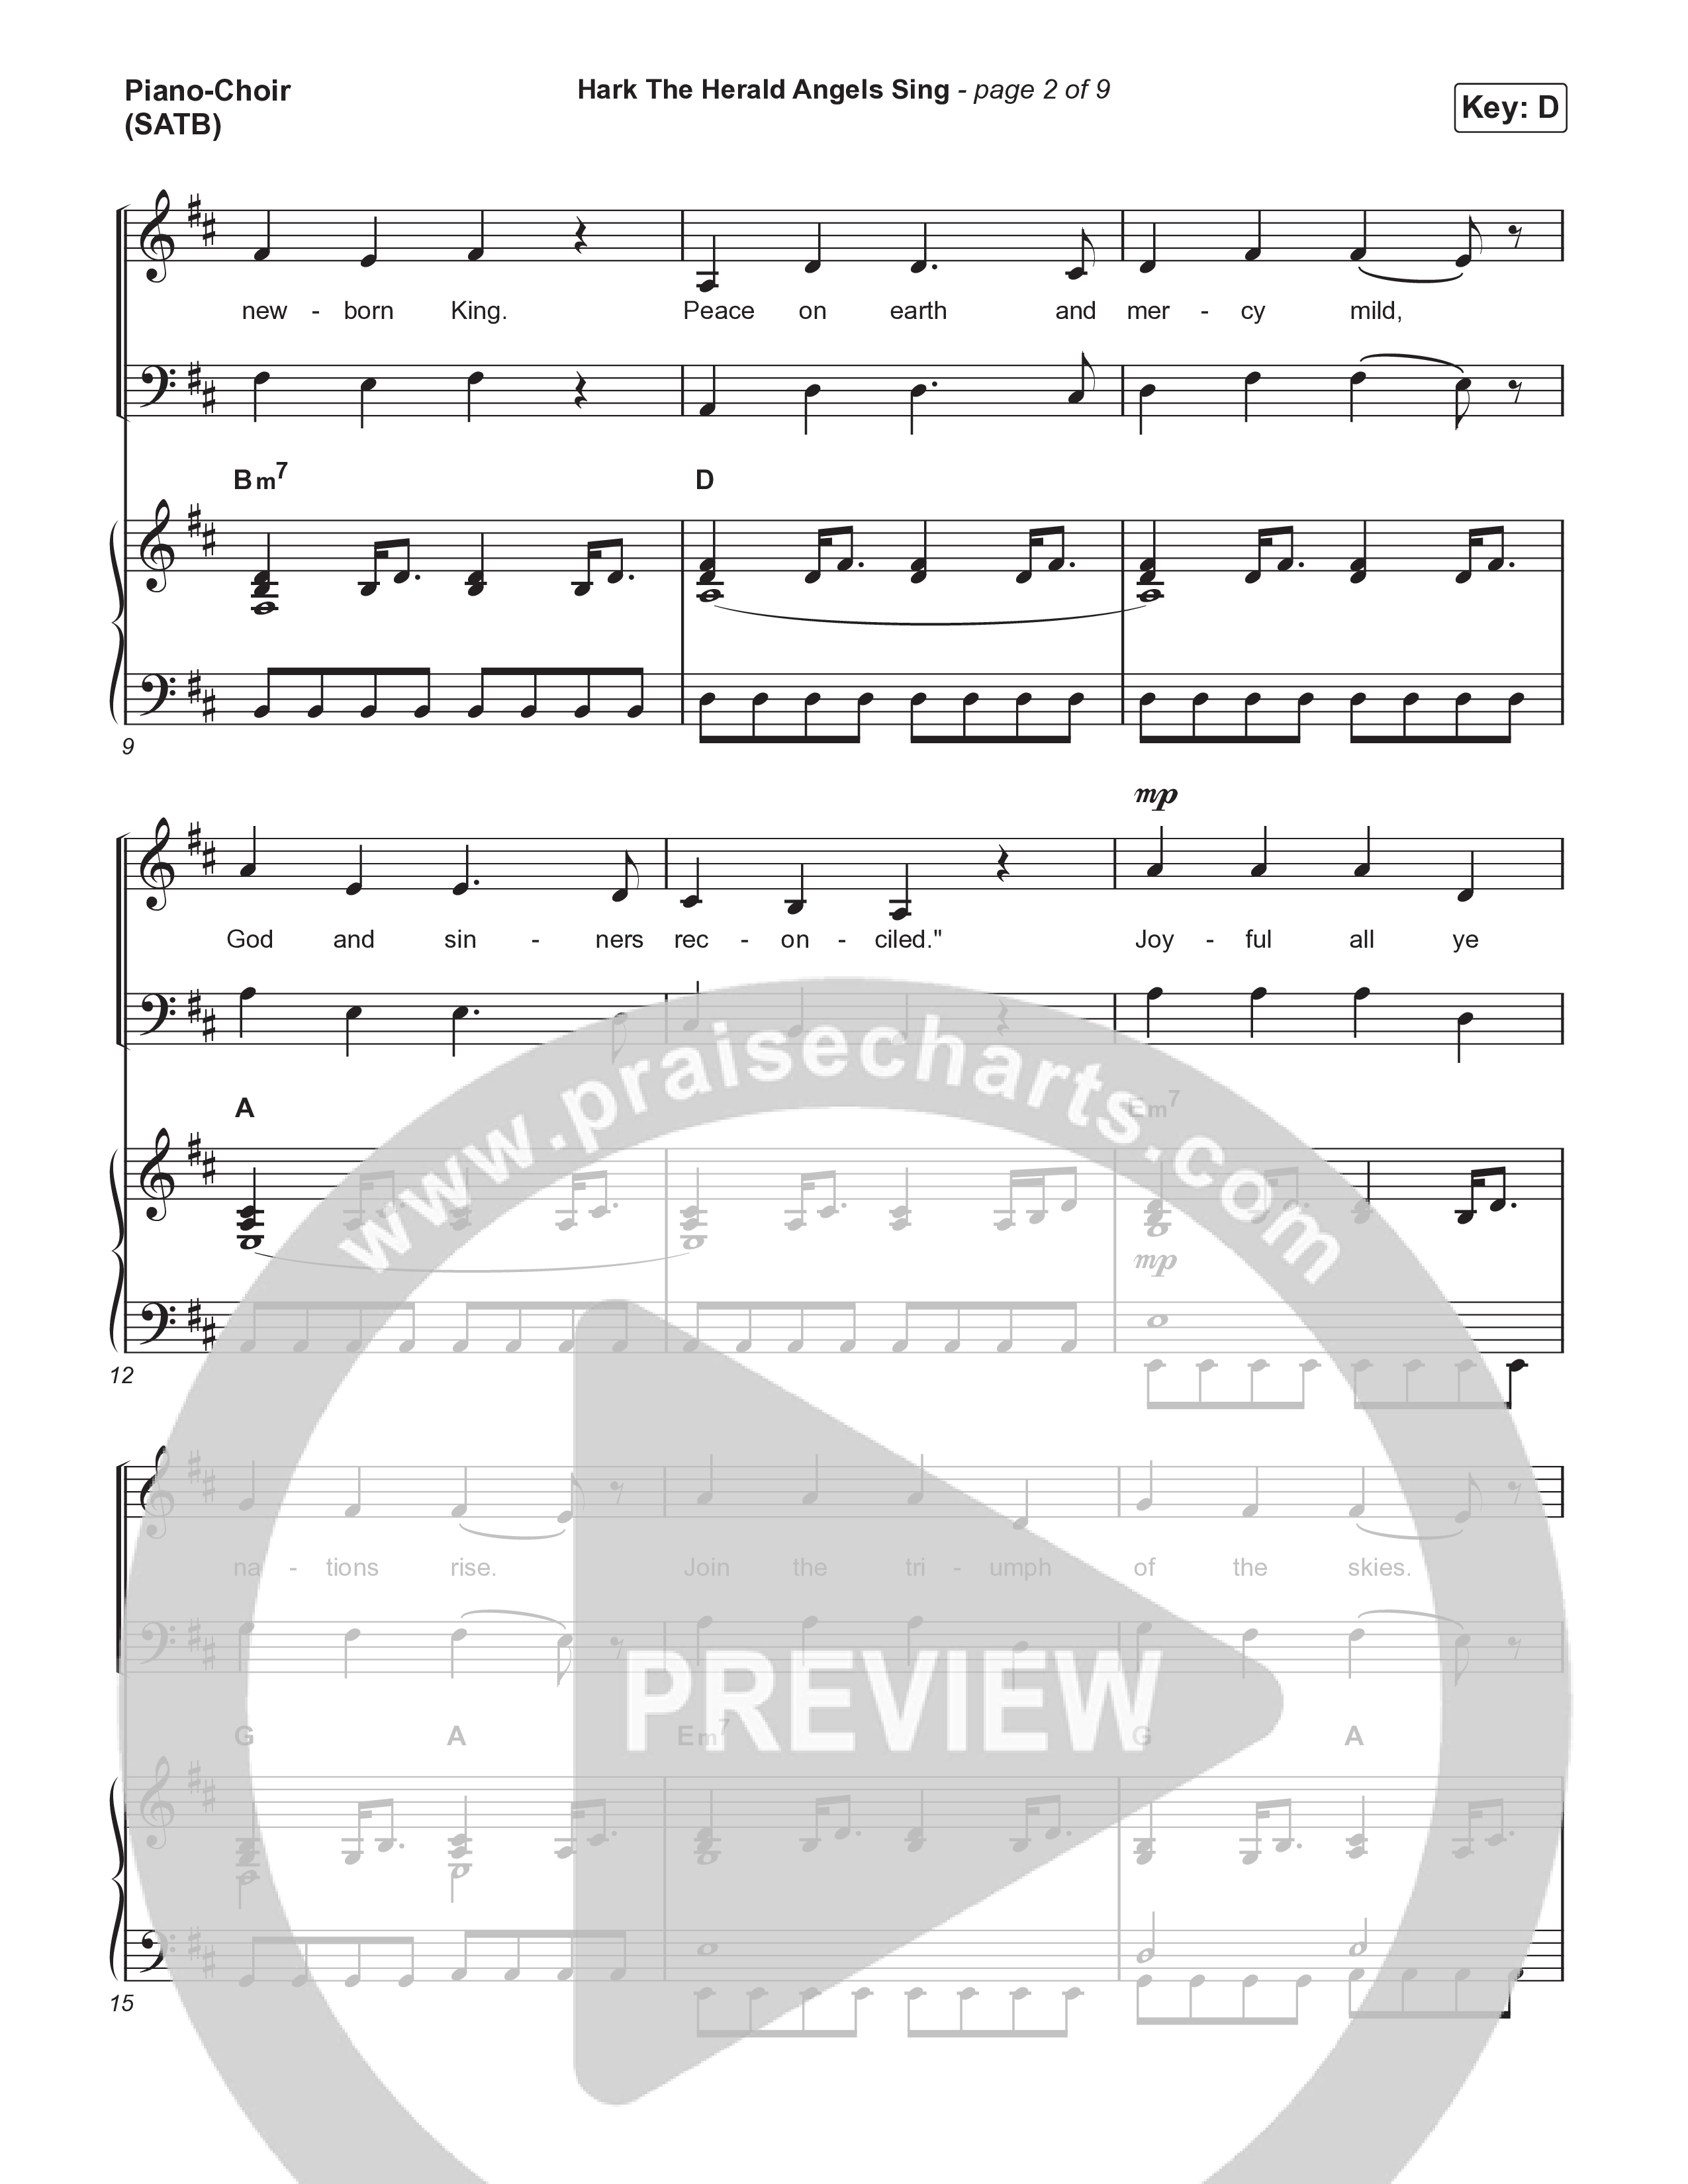 Hark The Herald Angels Sing Piano/Vocal (SATB) (Journey Worship Co)